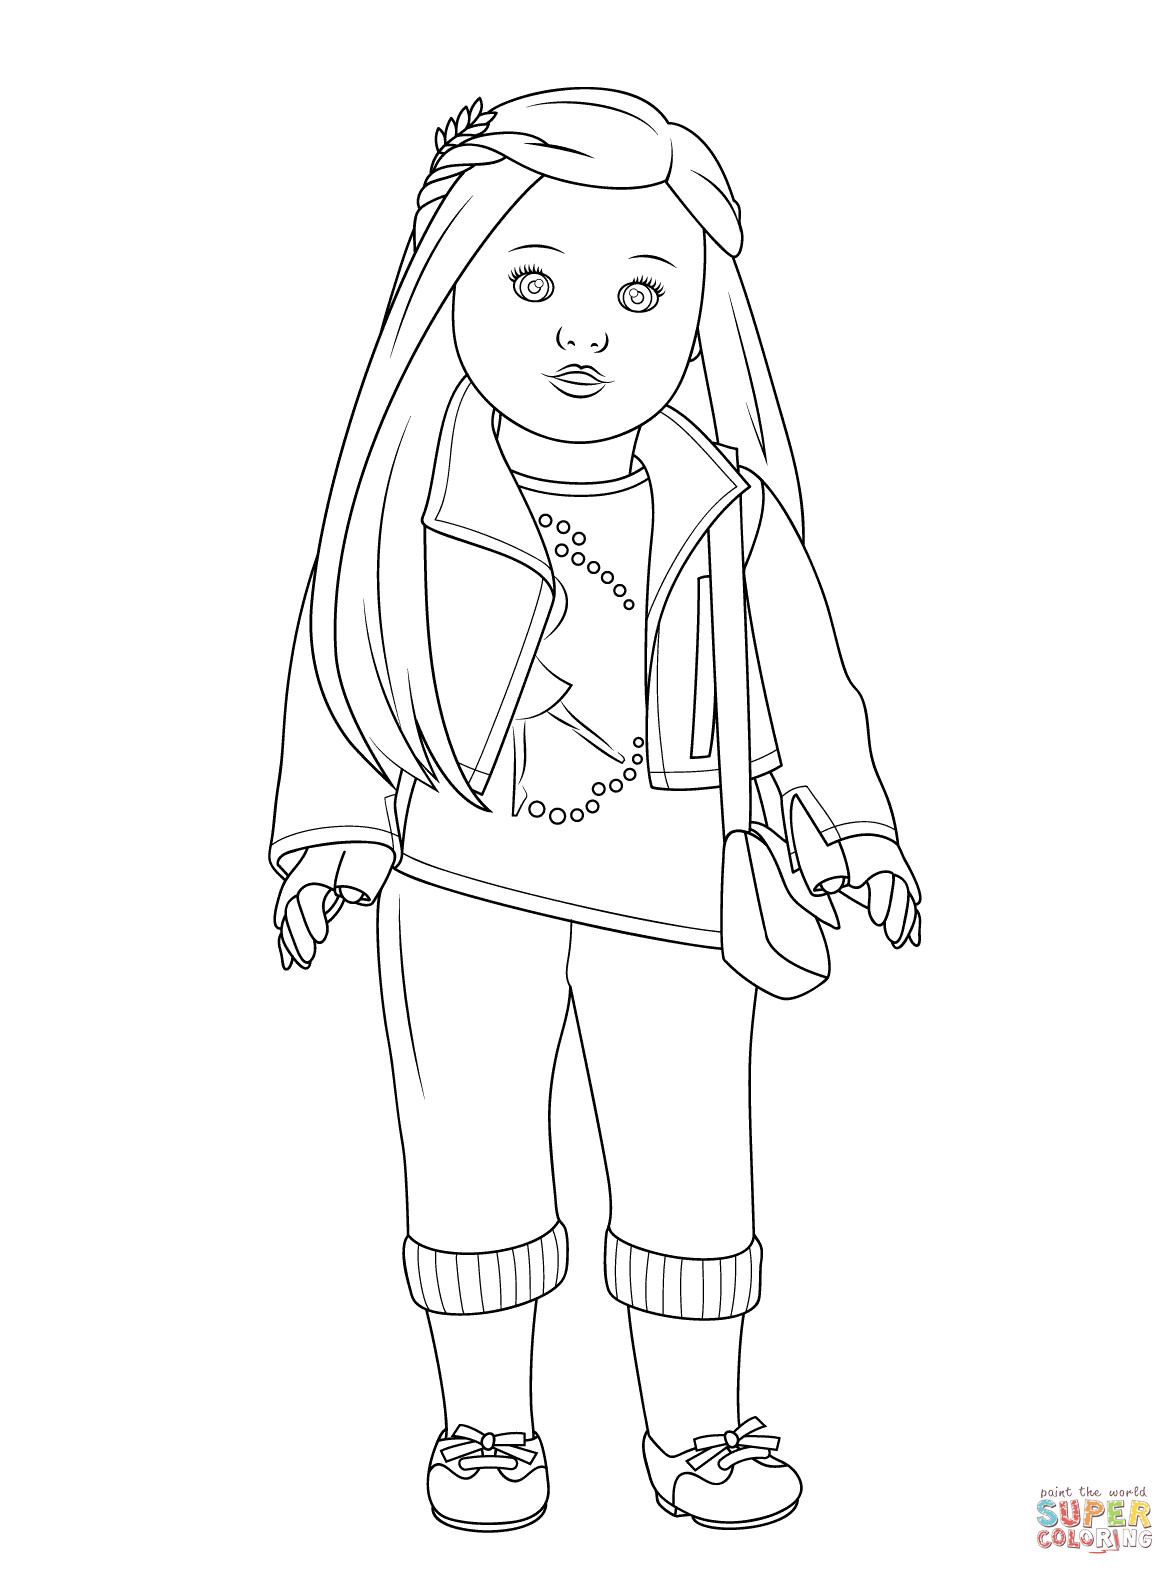 American Girl Isabelle Coloring Pages
 American Girl Isabelle Doll coloring page